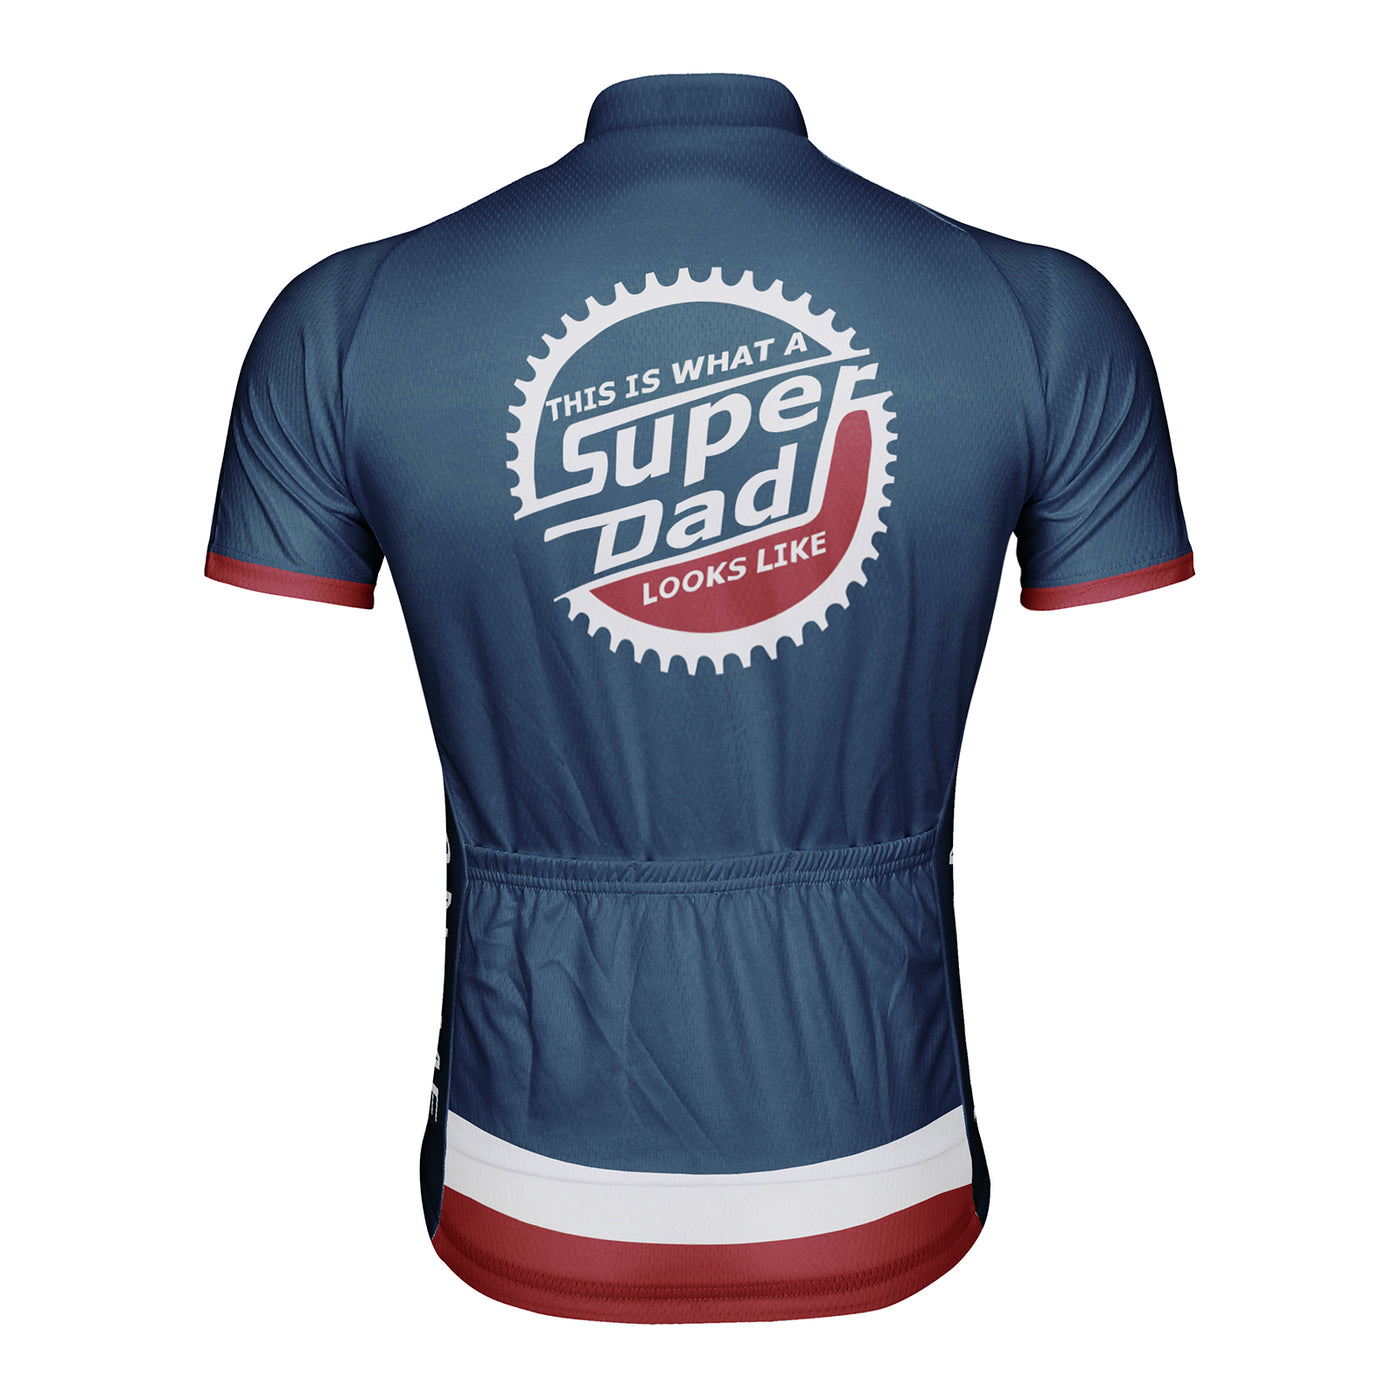 Customized Okayest Super Dad Men's Cycling Jersey Short Sleeve